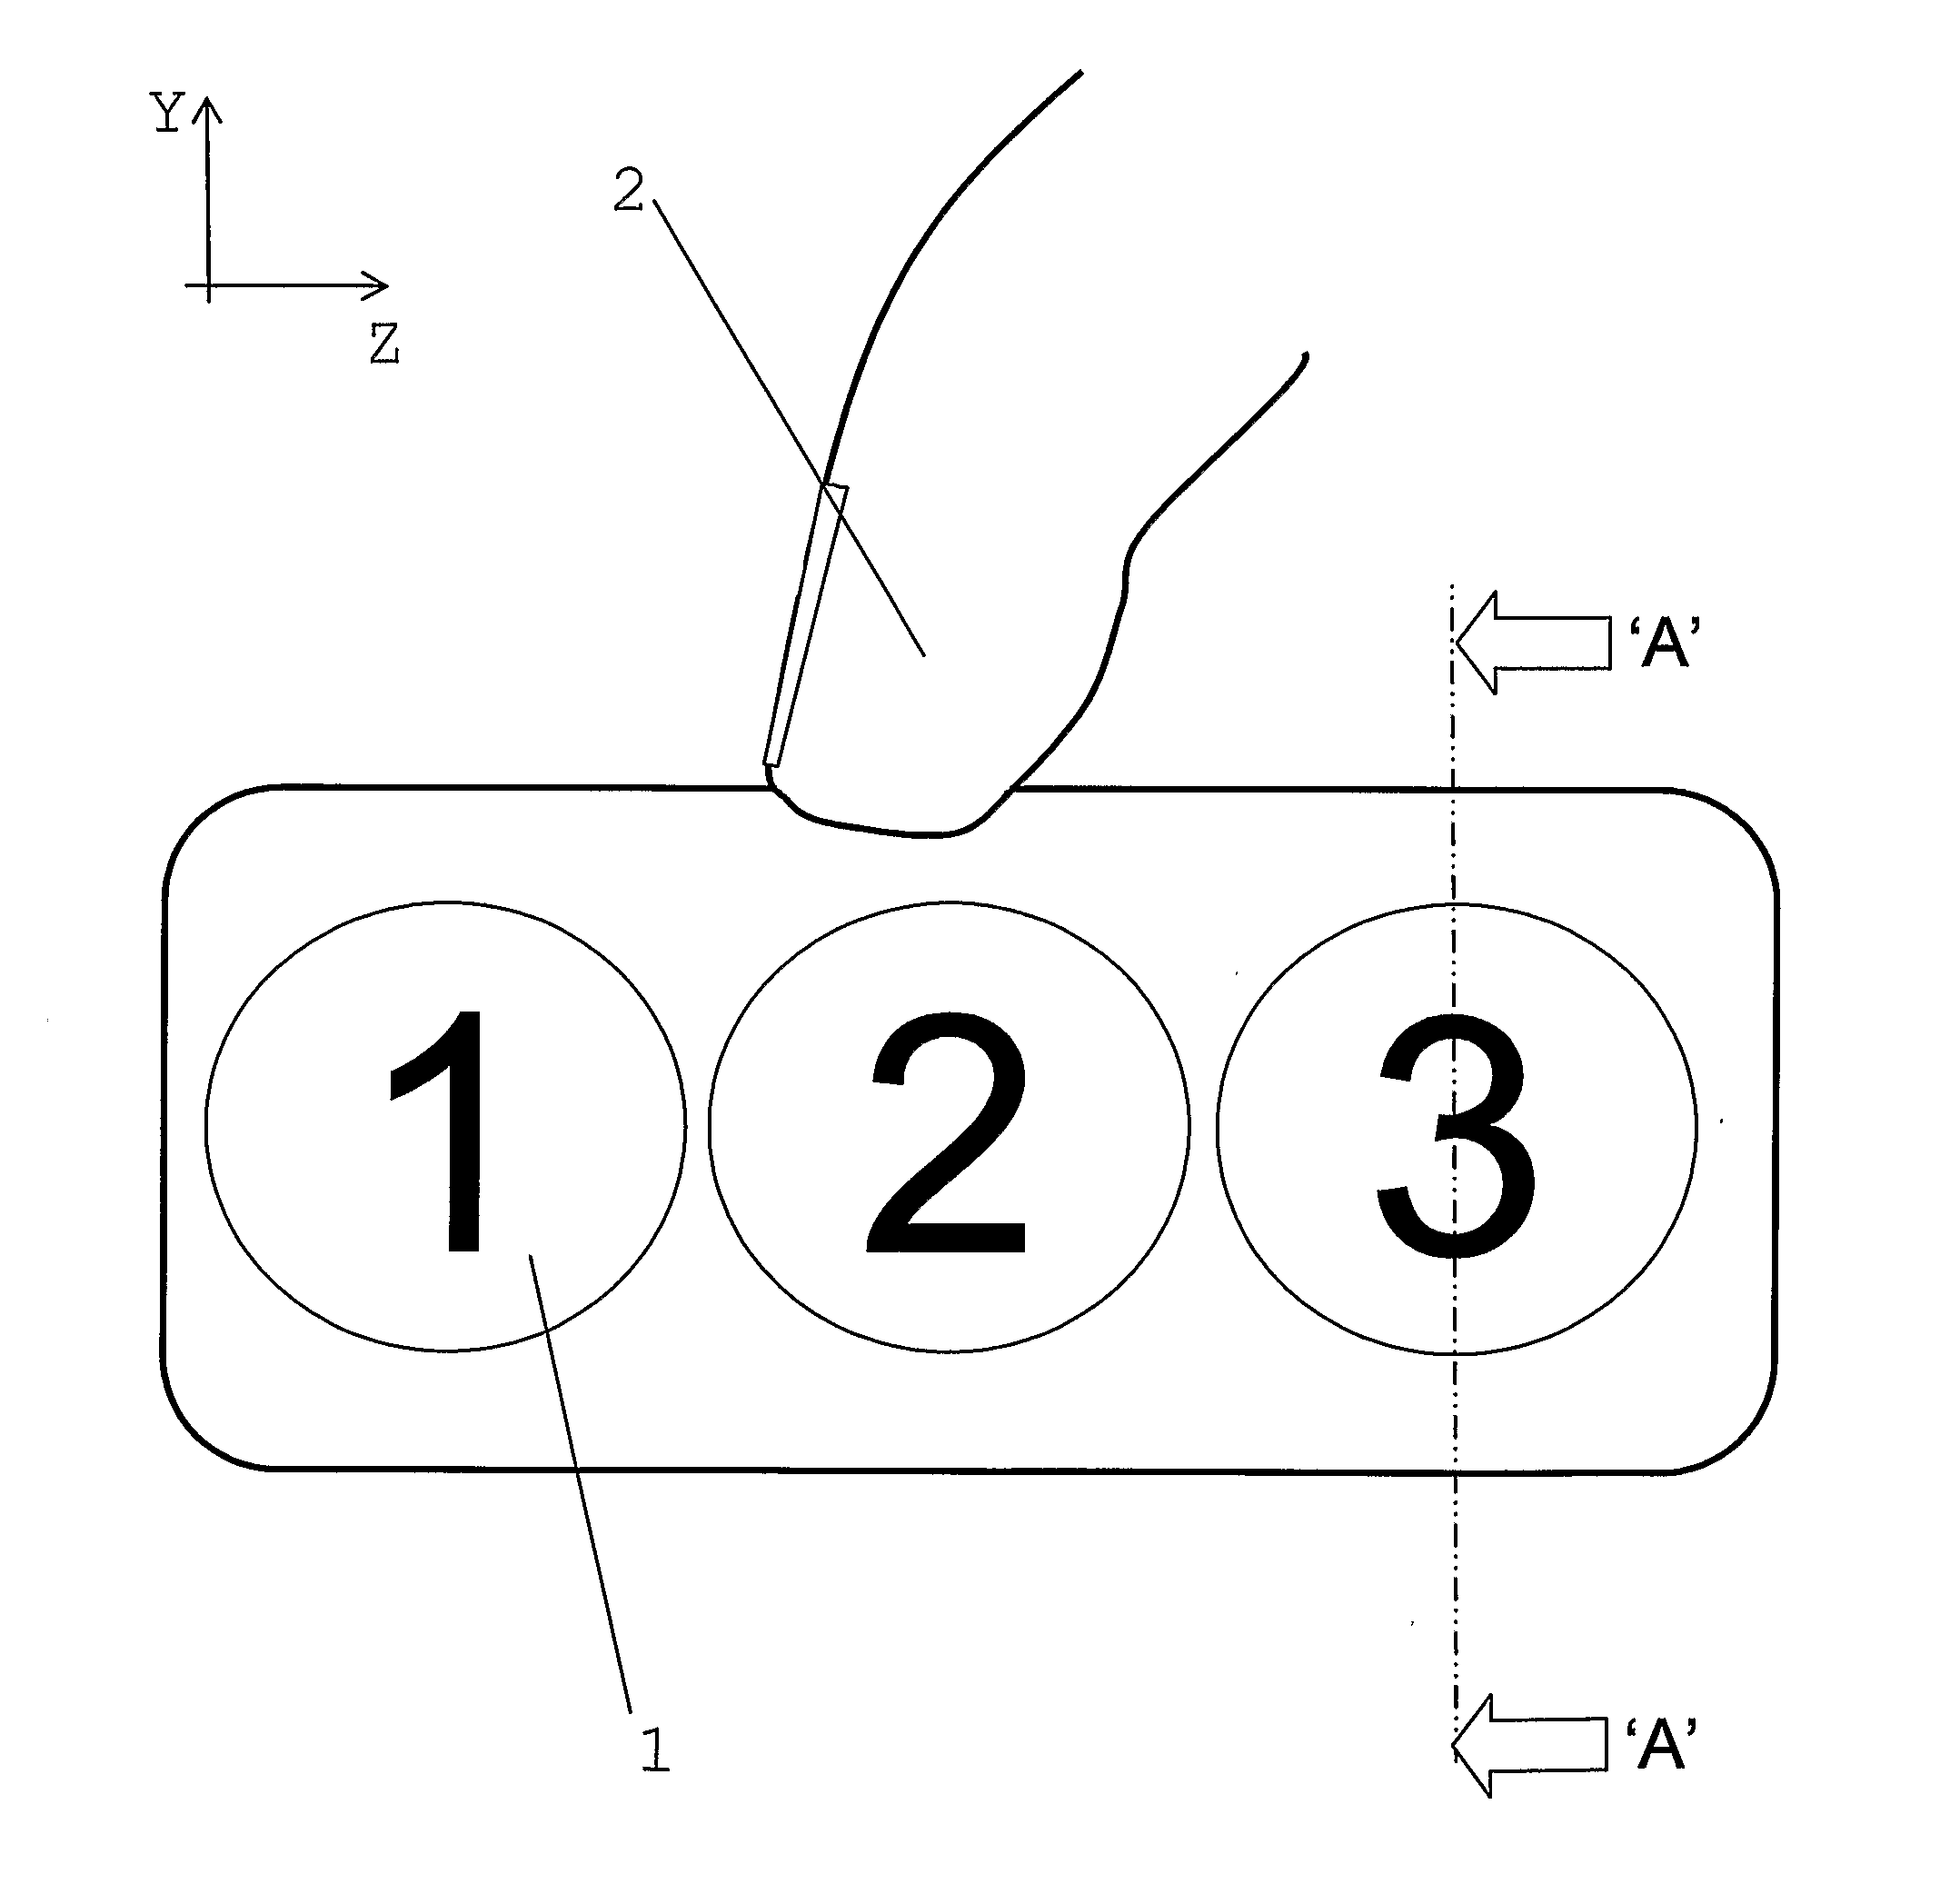 Pressure sensitive inductive detector for use in user interfaces